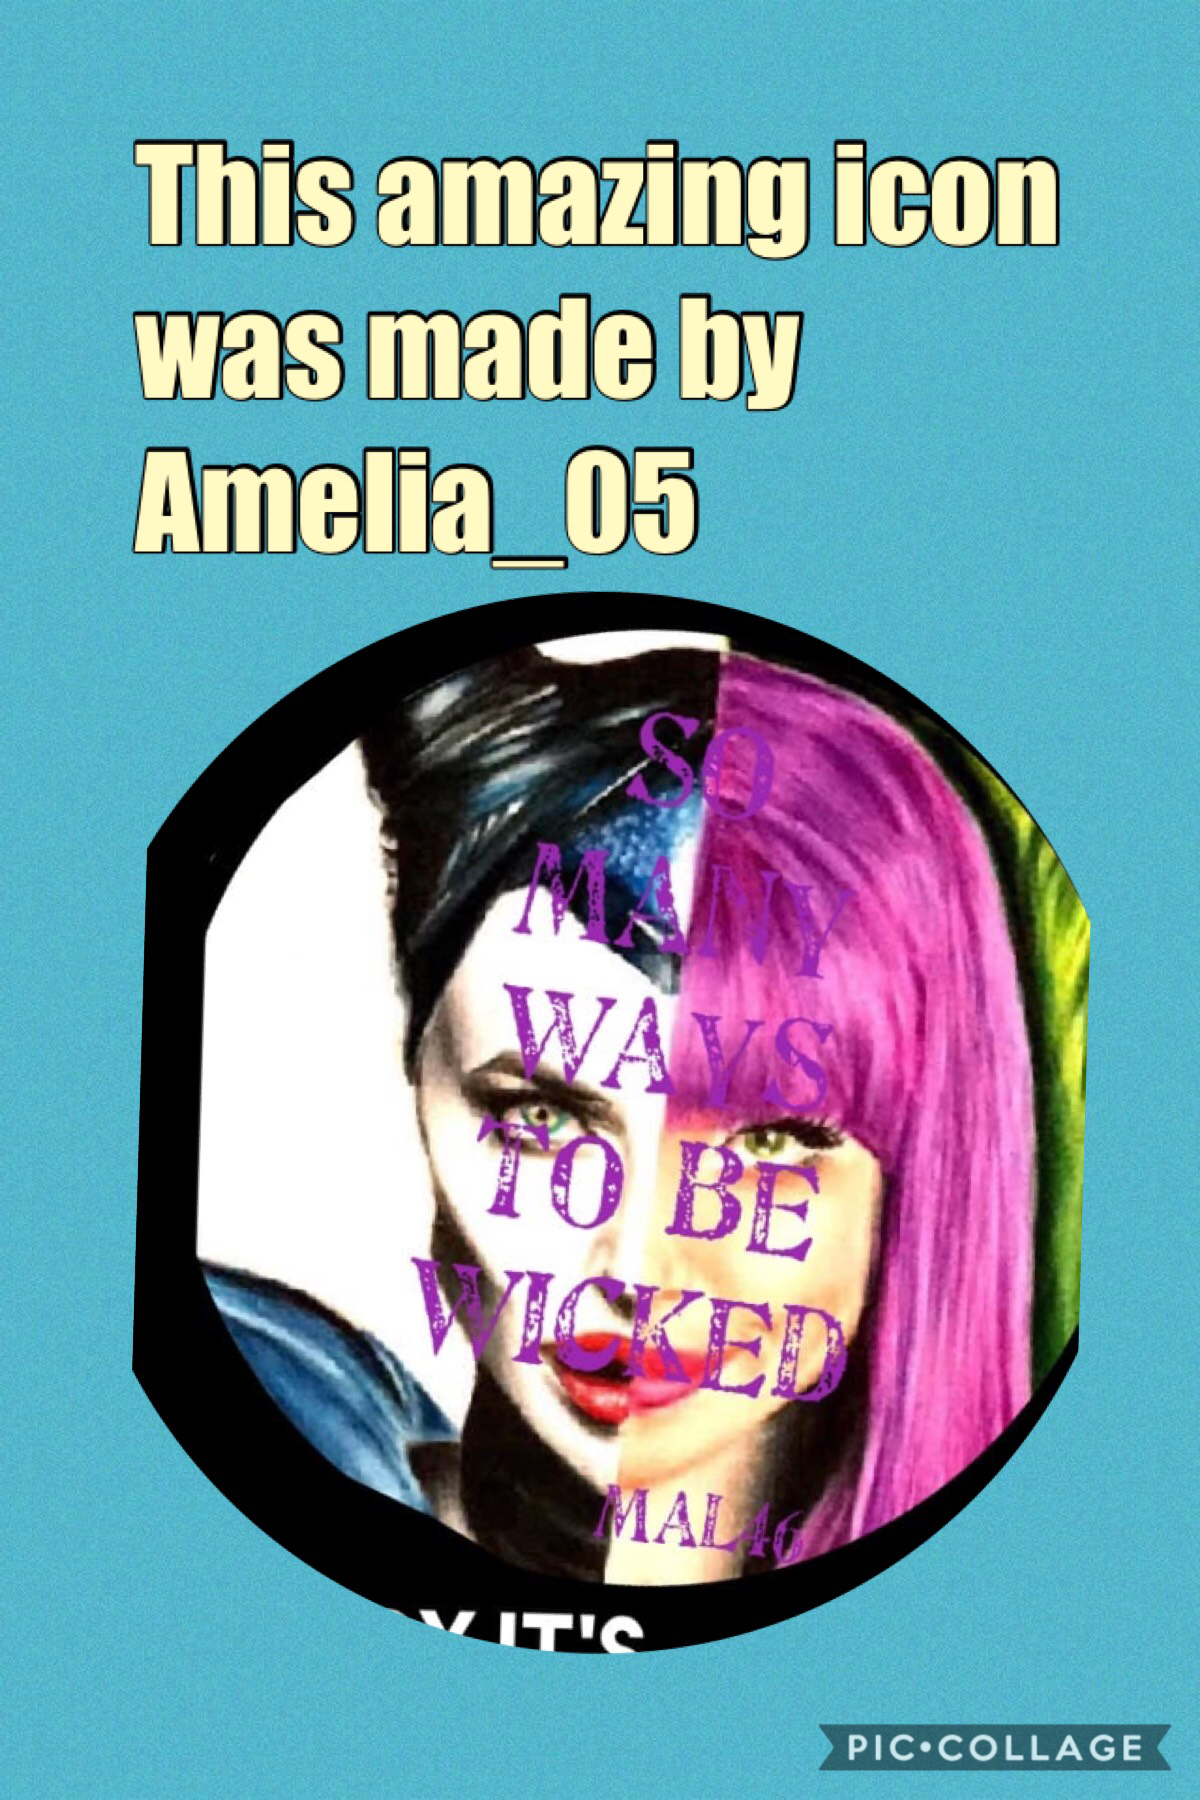 This amazing icon was made by Amelia_05